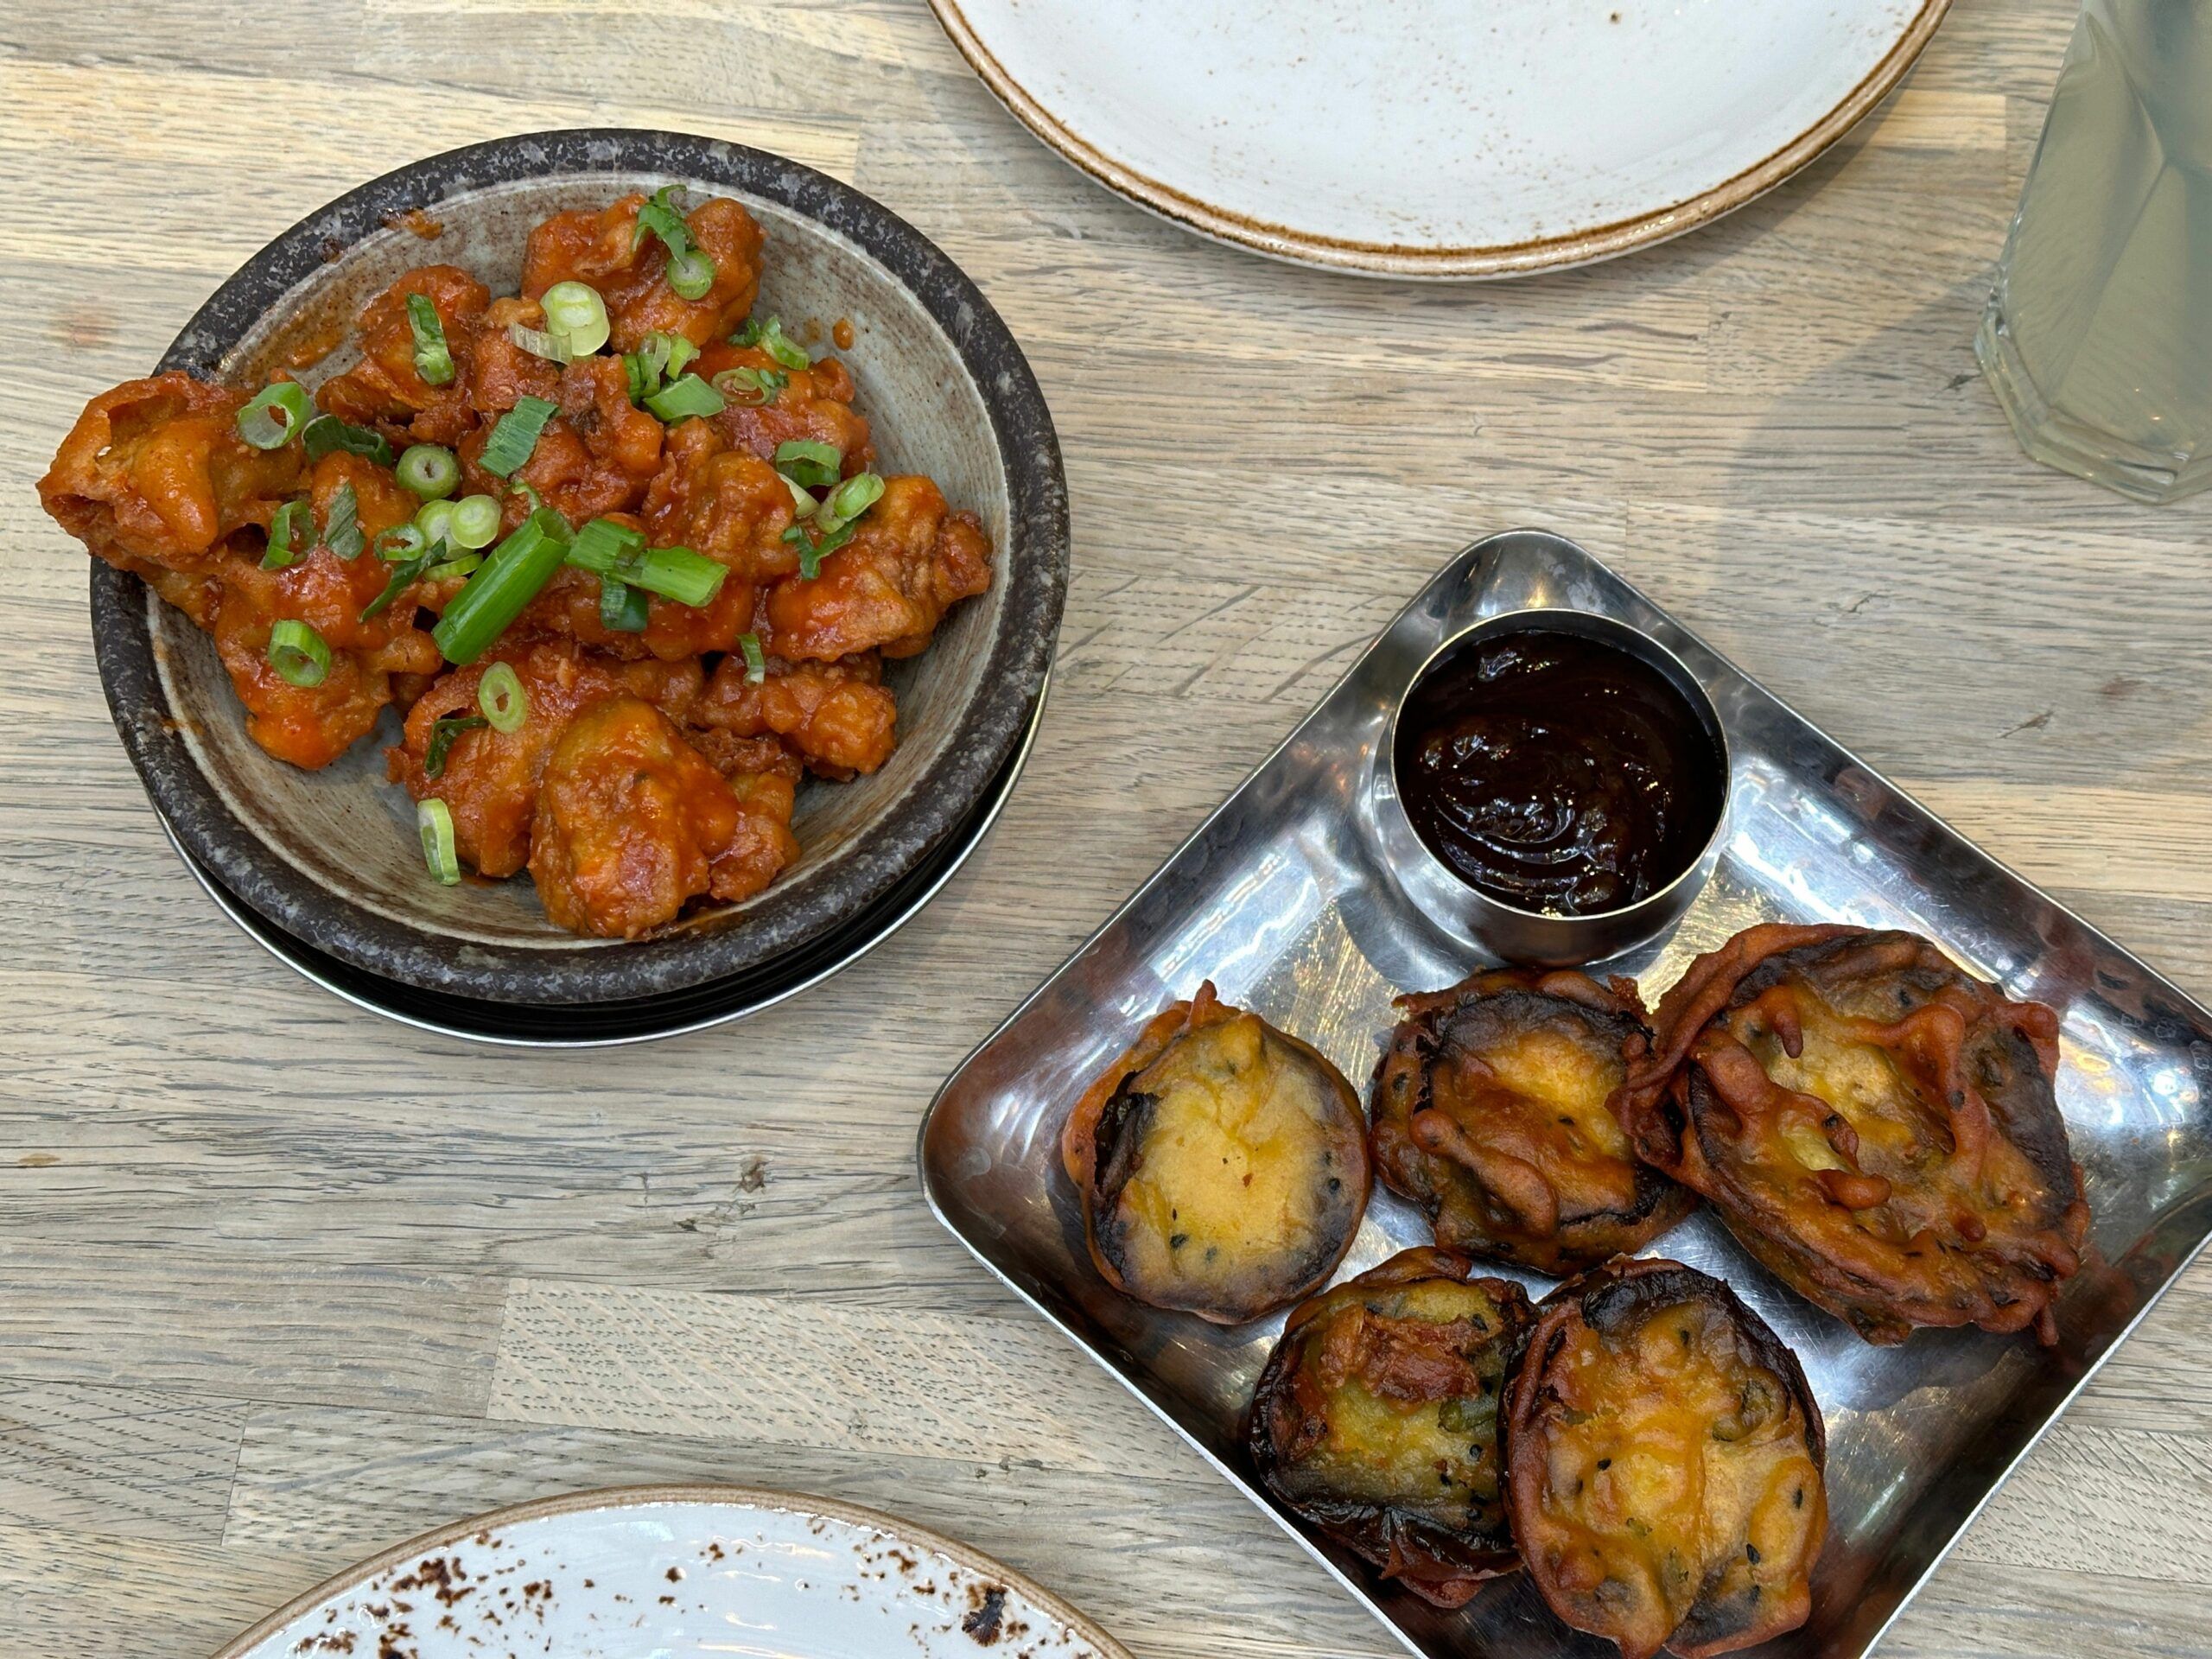 light and crispy aubergine bhajis with a sticky, rich roast tomato and chilli chutney and an overwhelmingly delicious mushroom manchurian coated in a sweet and sour IndoChinese sauce